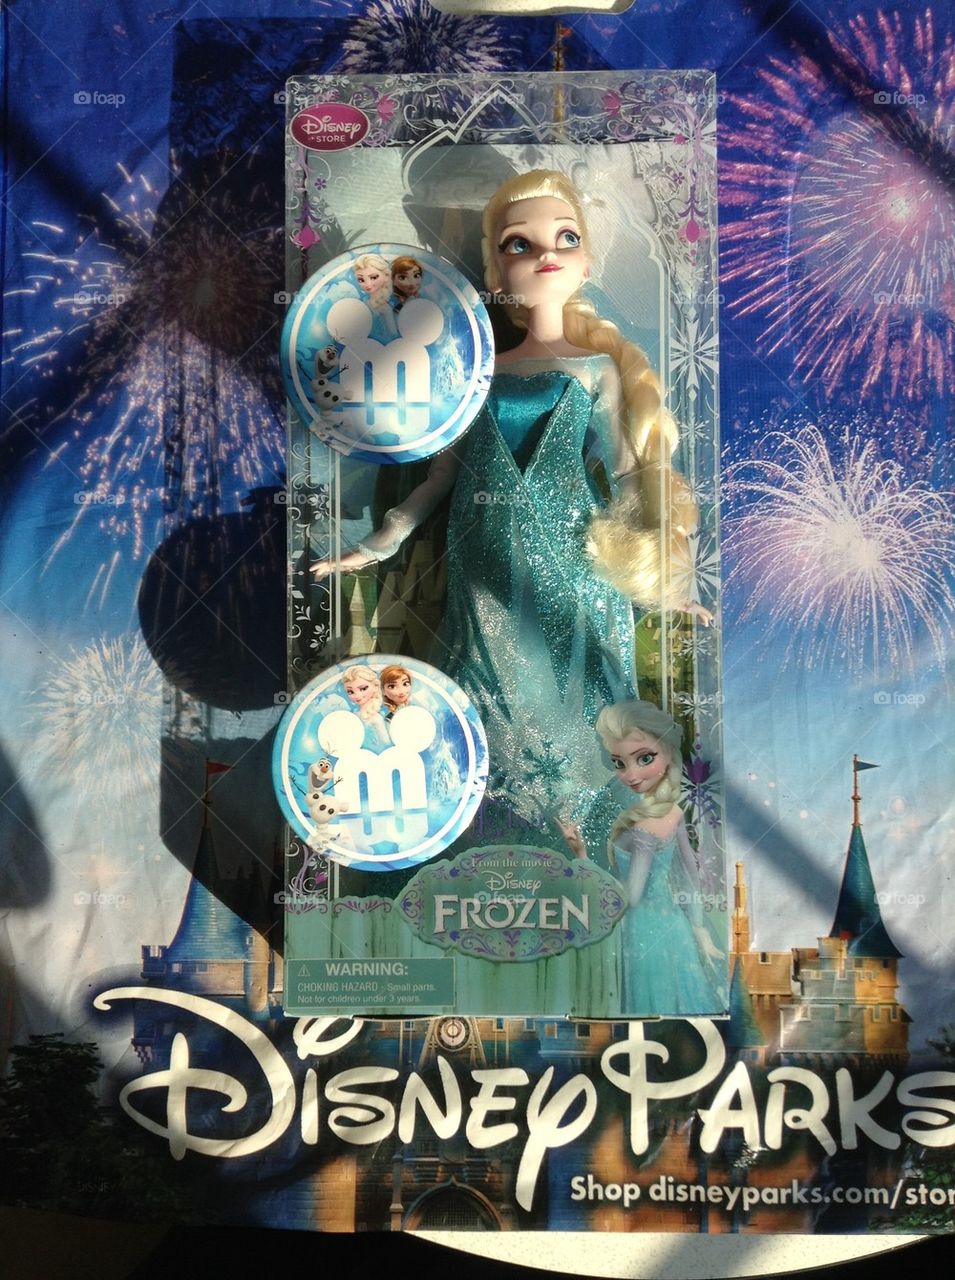 DISNEYLAND "FROZEN" ELSA DOLL with "LIMITED EDITION" FROZEN MOVIE WORLD PREMIERE PINS From the Mouse4Life Club